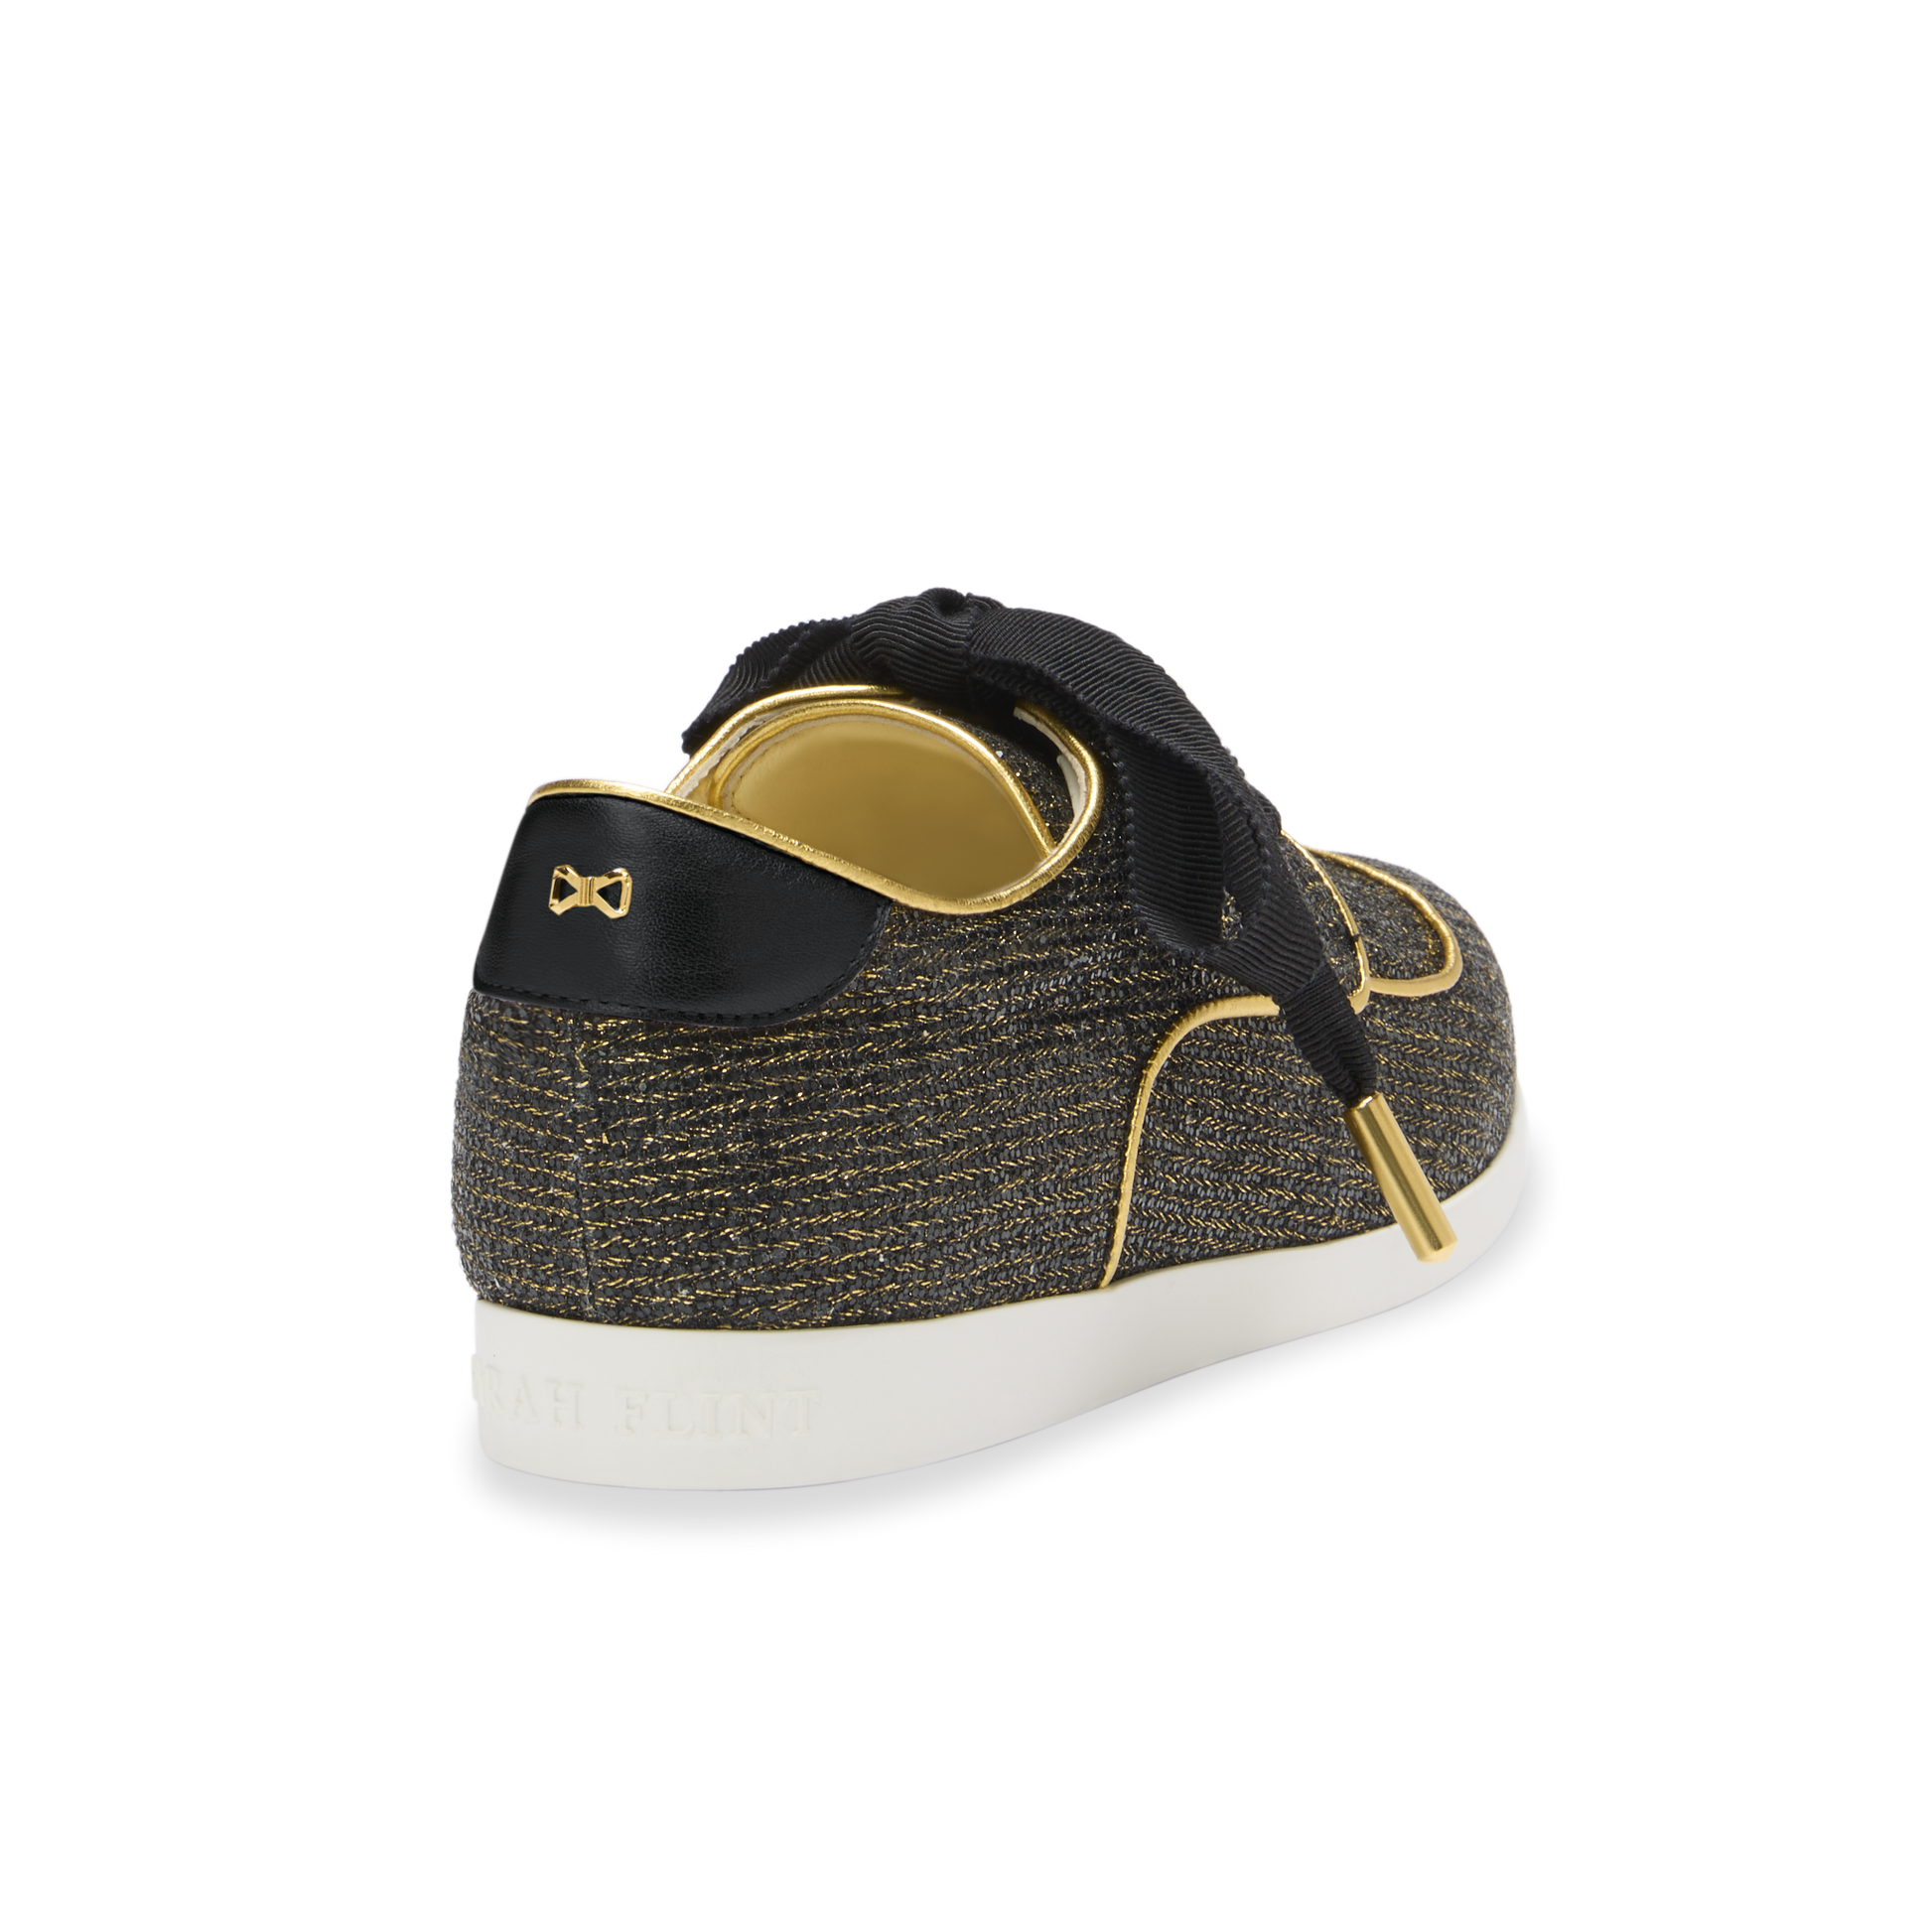 Wanderlust Sneaker in Black and Gold Sparkle